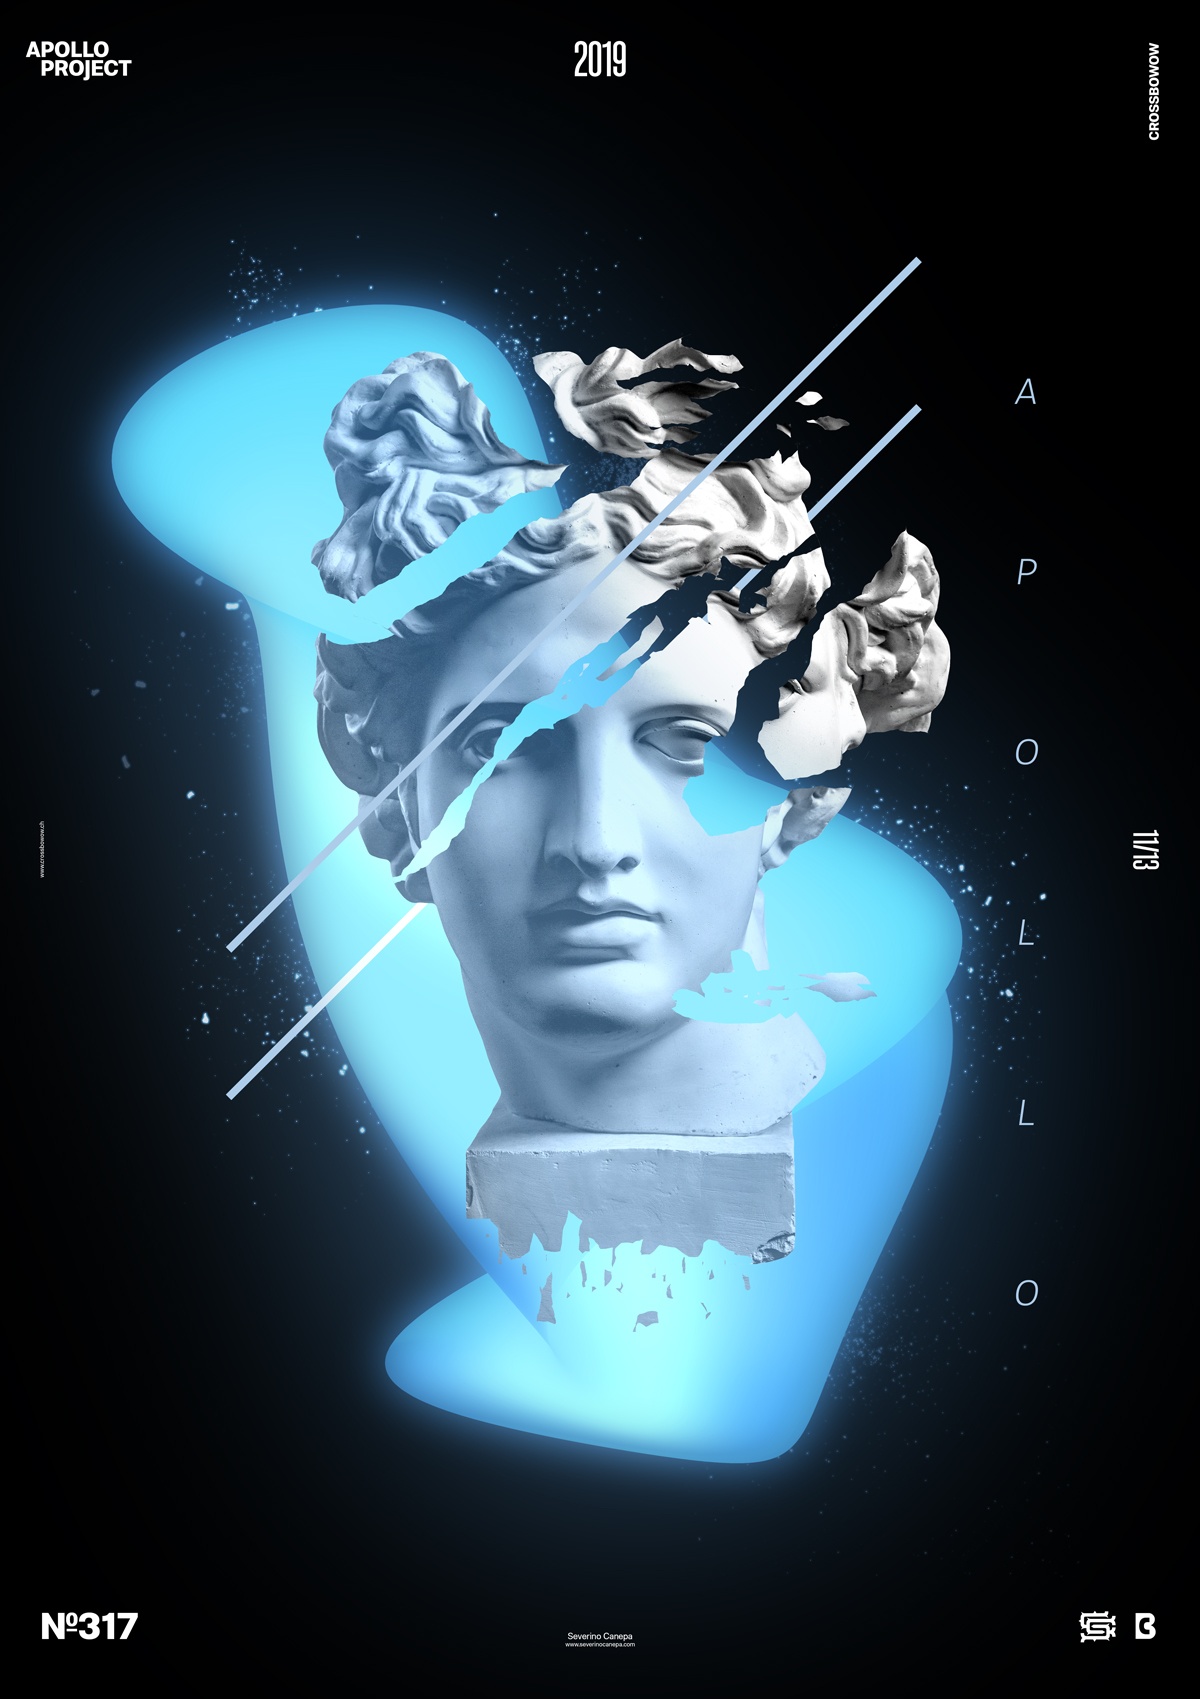 Poster design realized with blue lights and a destructured Apollo